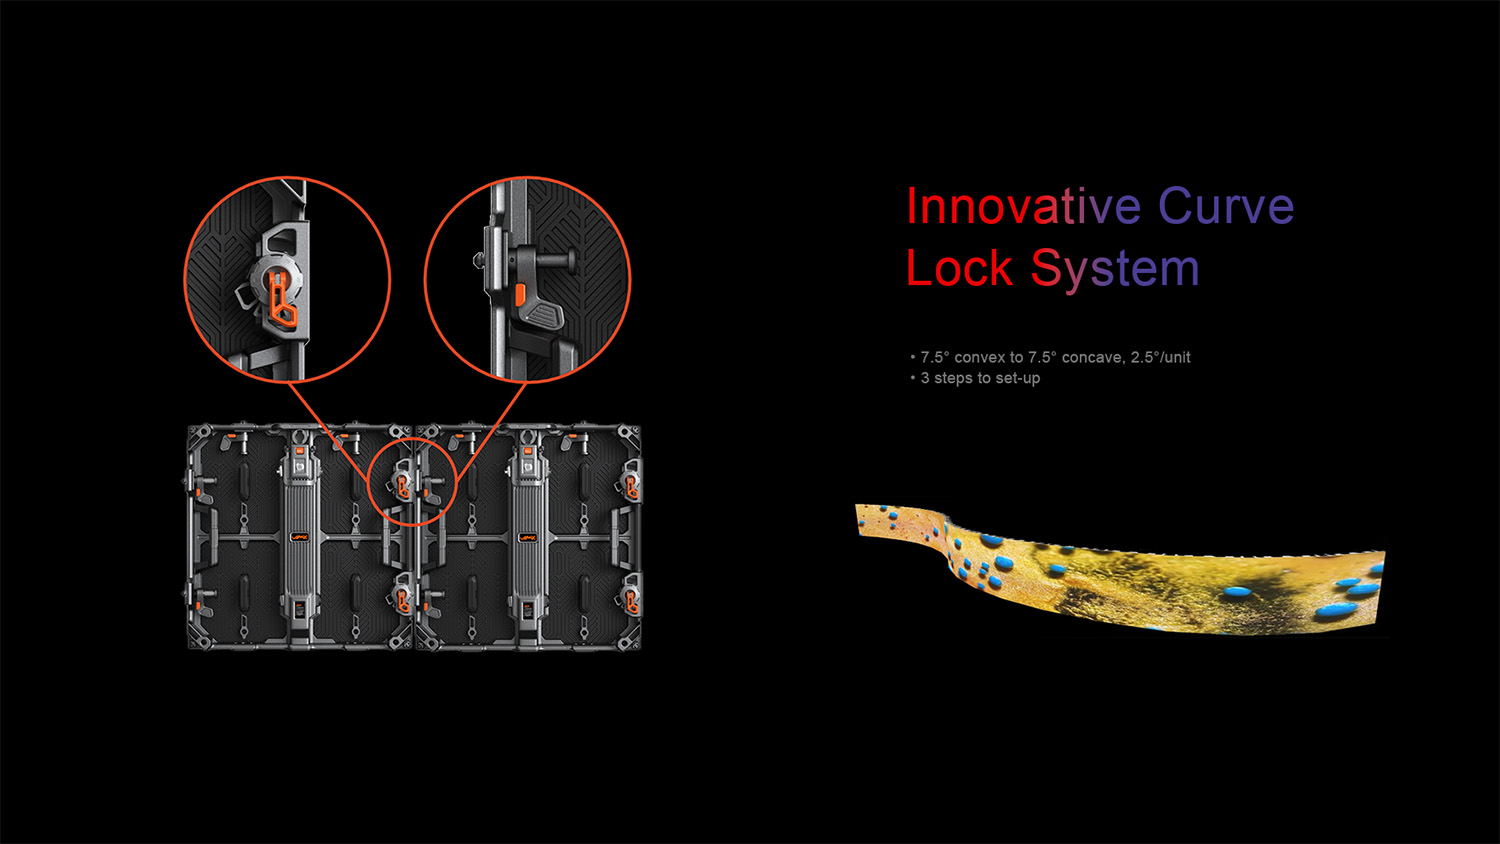 Innovative Curve Lock System. ·7.5° convex to 7.5° concave, 2.5°/unit ·3 steps to set-up